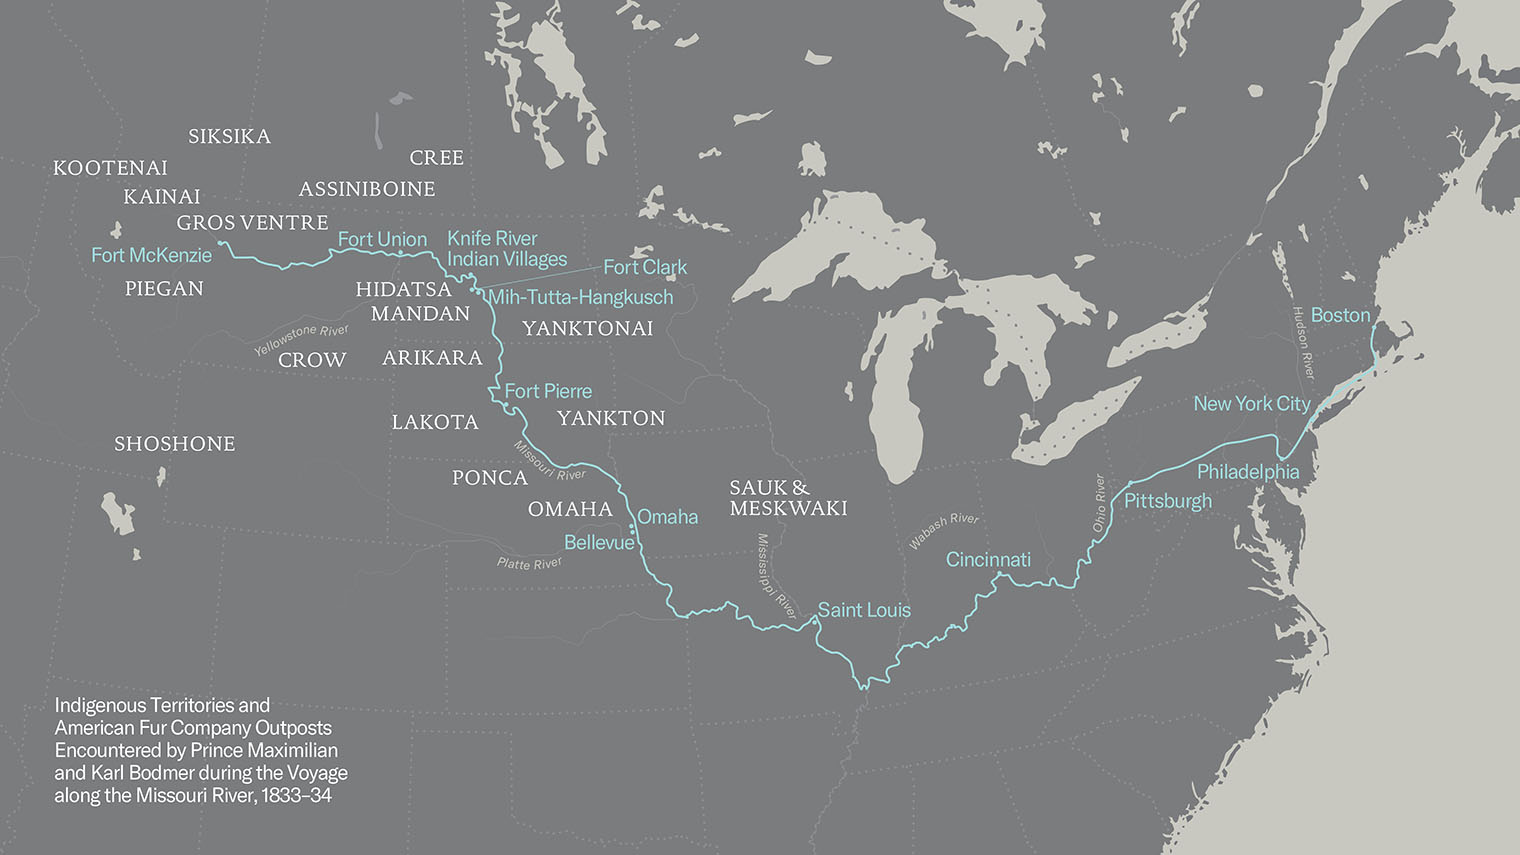 A map of indigenous territories and American Fur Company outposts encountered by Prince Maximilian and Karl Bodmer during the Voyage along the Missouri River, 1833–34